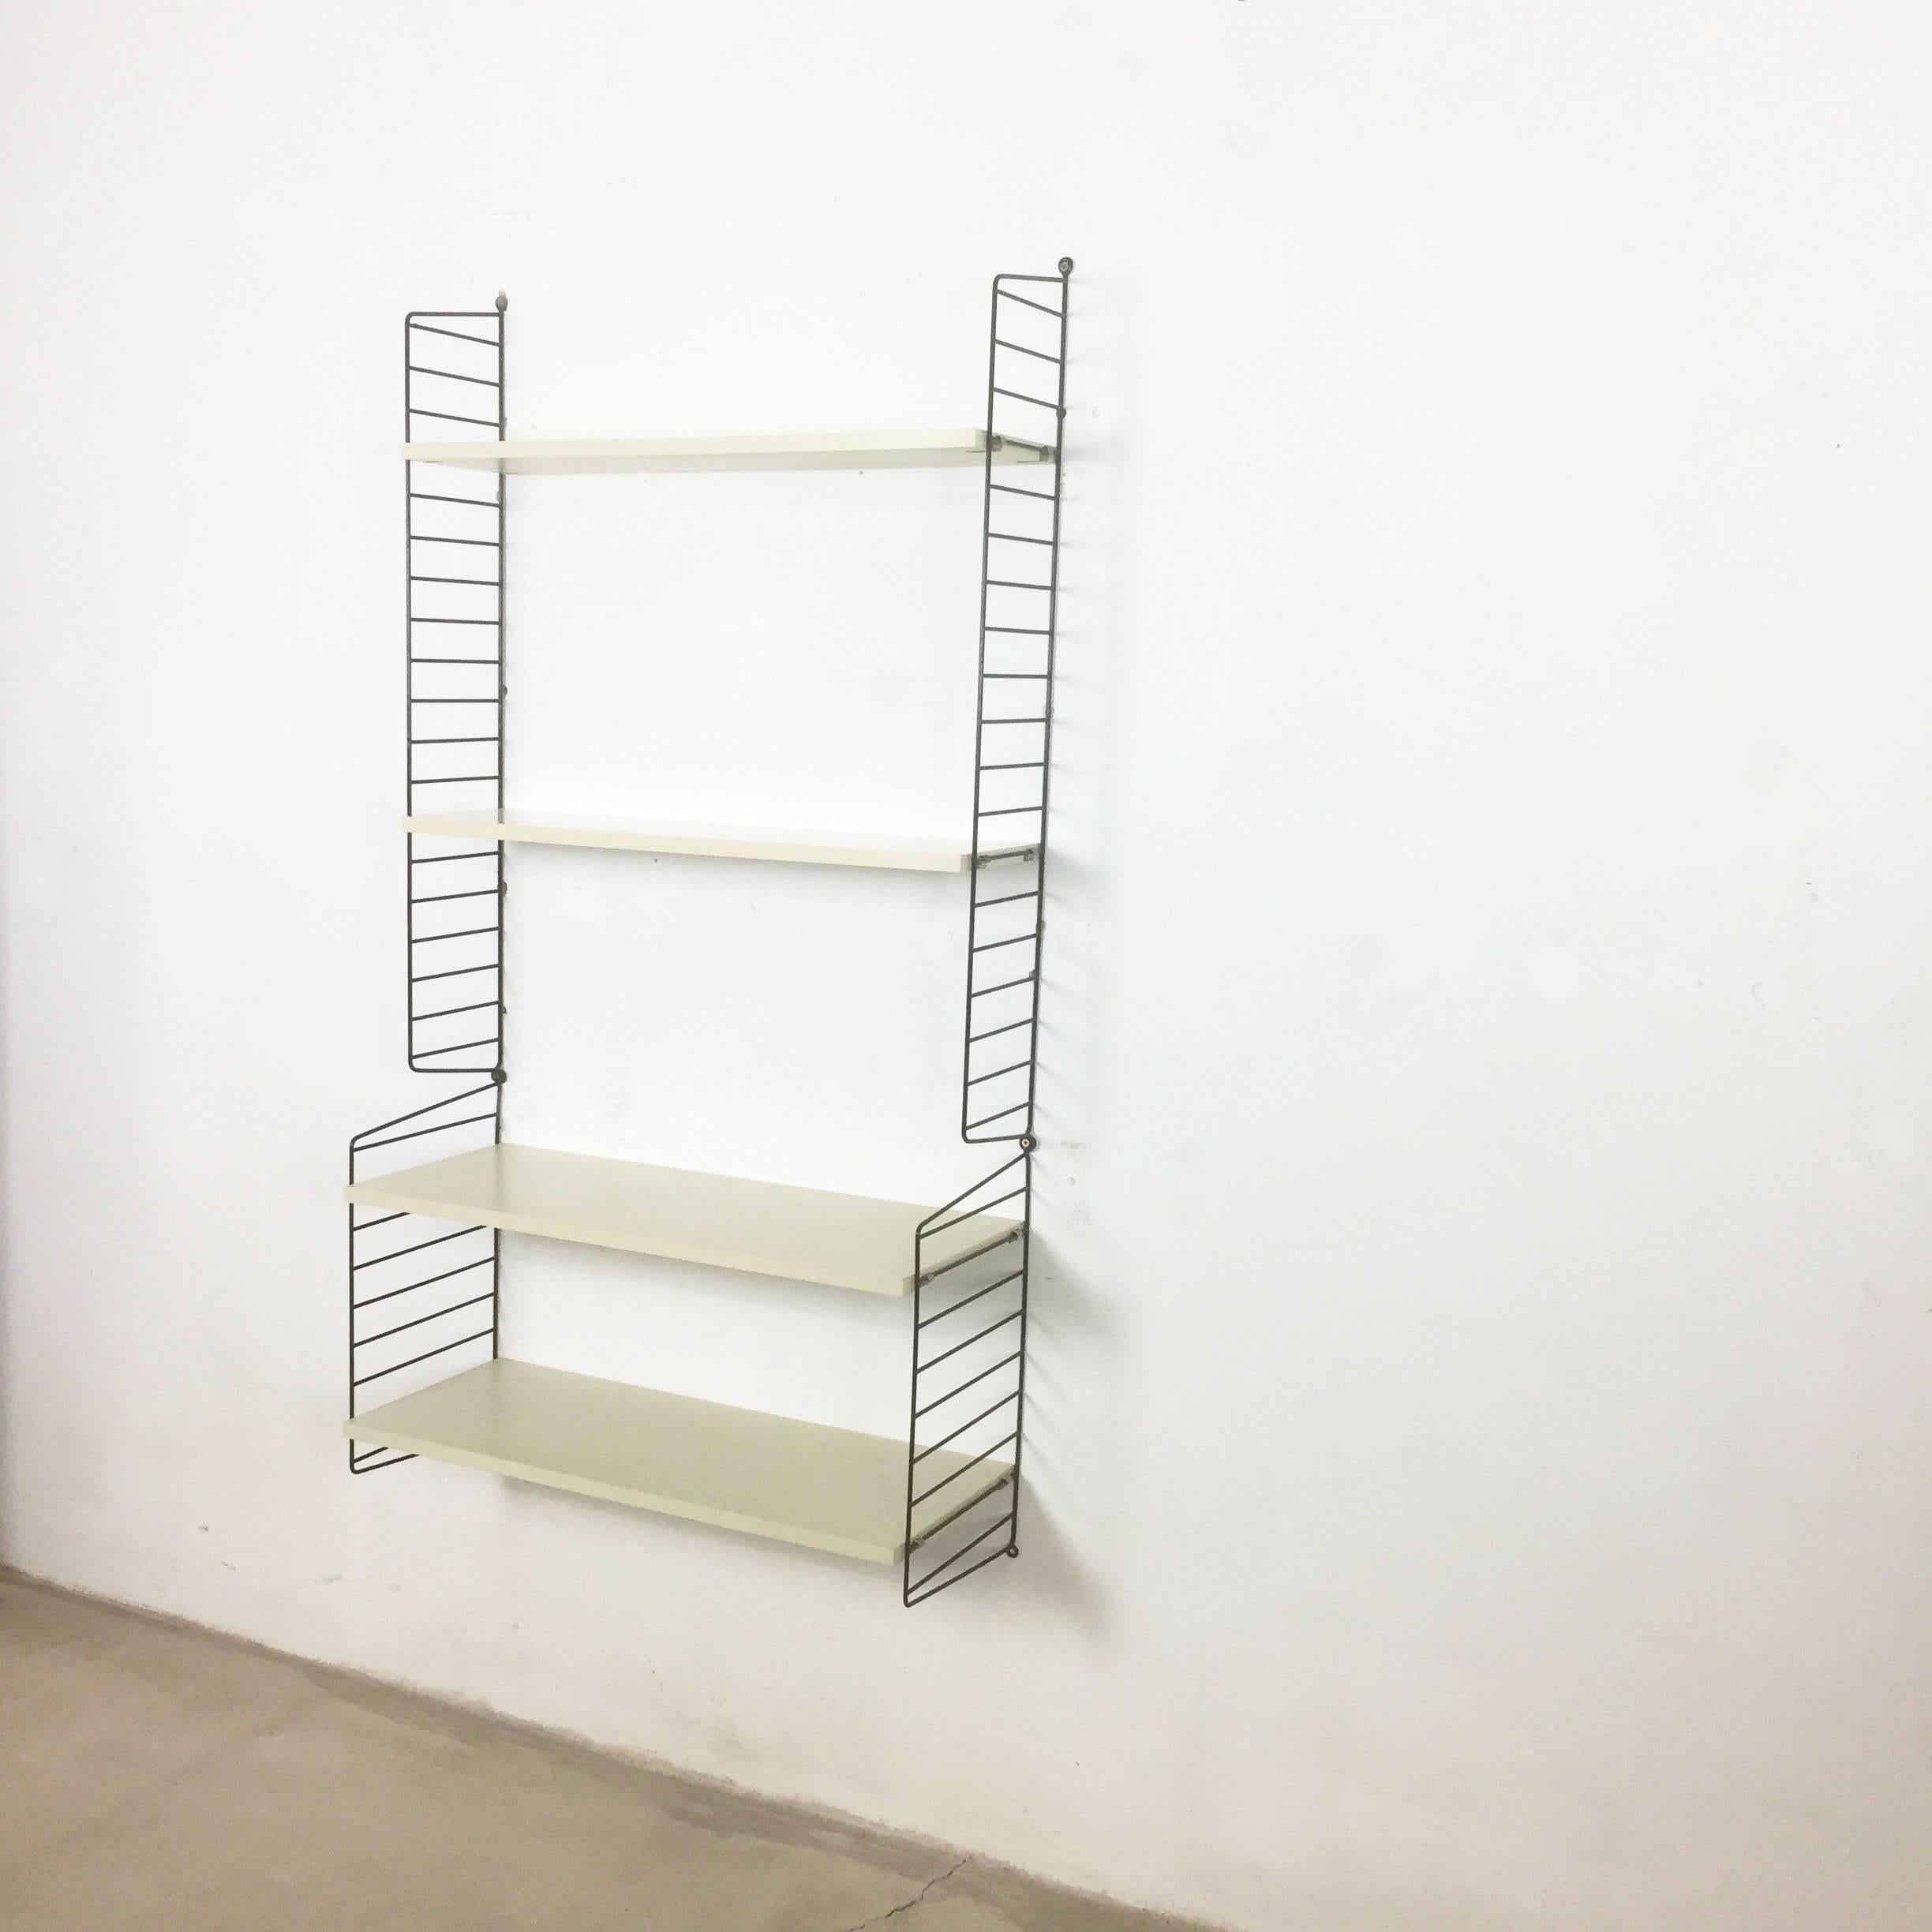 String regal wall unit

Made in Sweden

Bokhyllan ’The Ladder Shelf’

Design: Nils und Kajsa Strinning, 1949

The architect Nisse Strinning was born in 1917. From 1940 to 1947 he studied architecture in Stockholm, before he designed the